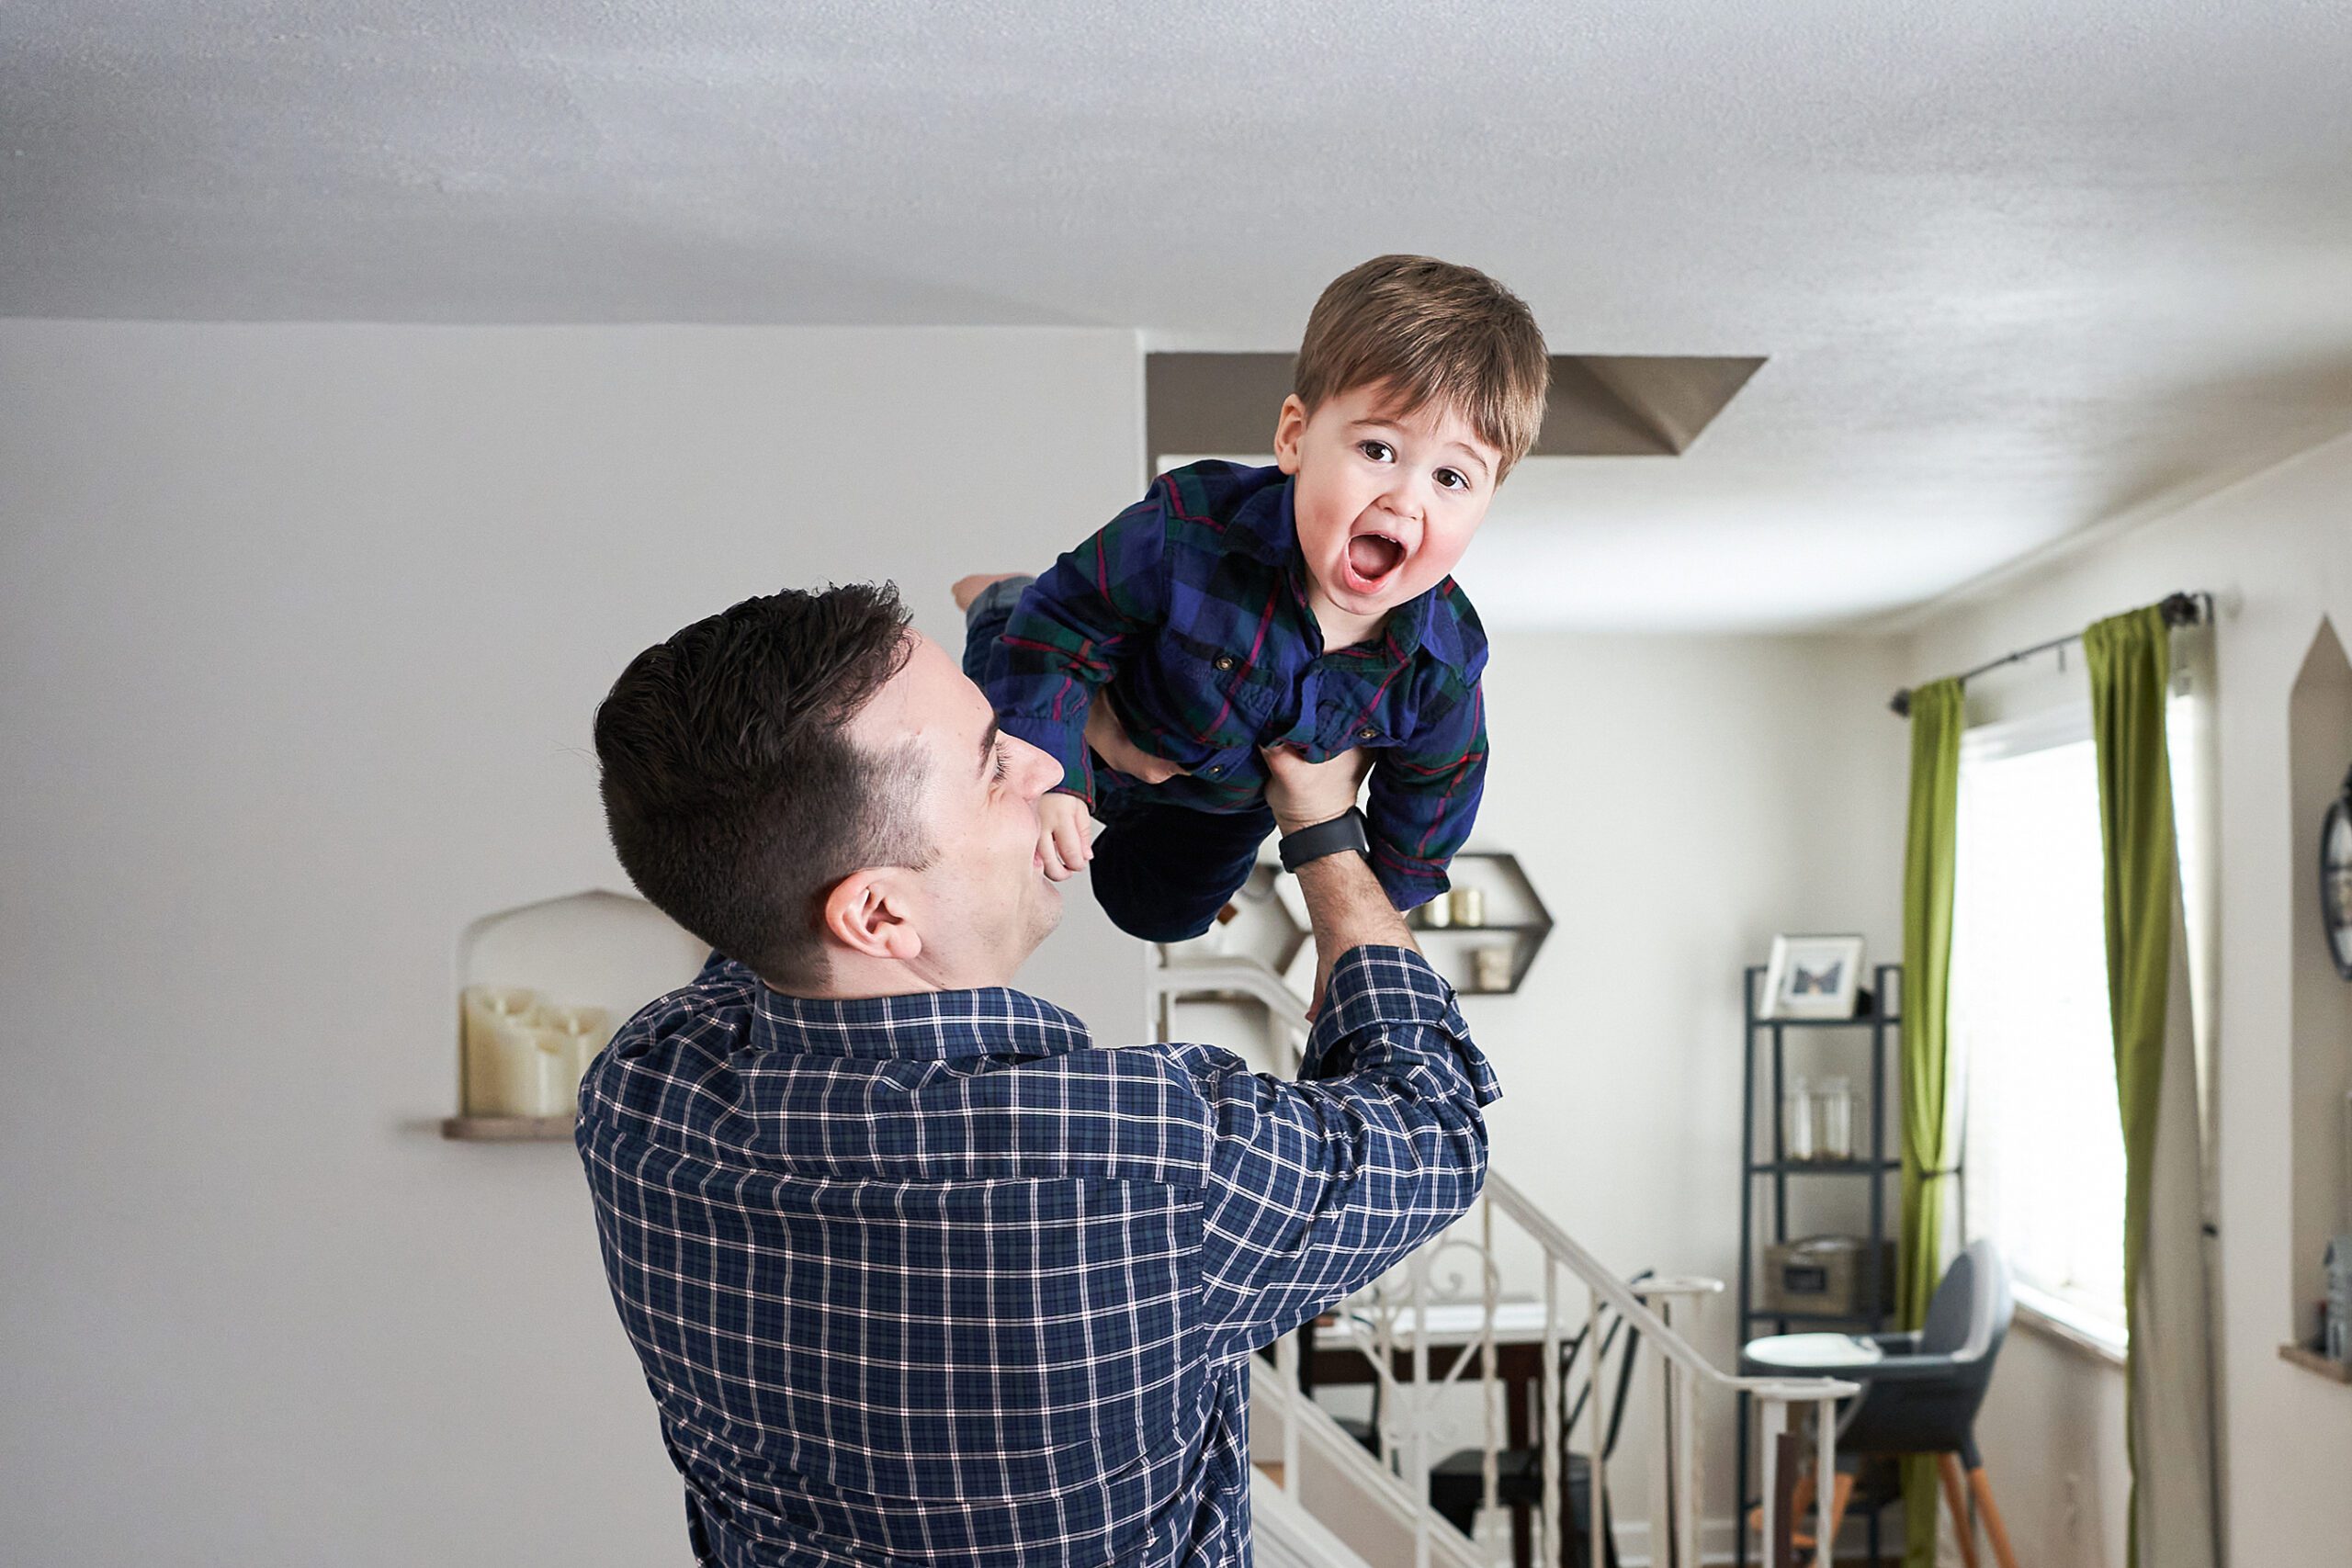 A man lifting a cheerful child in the air inside a home.